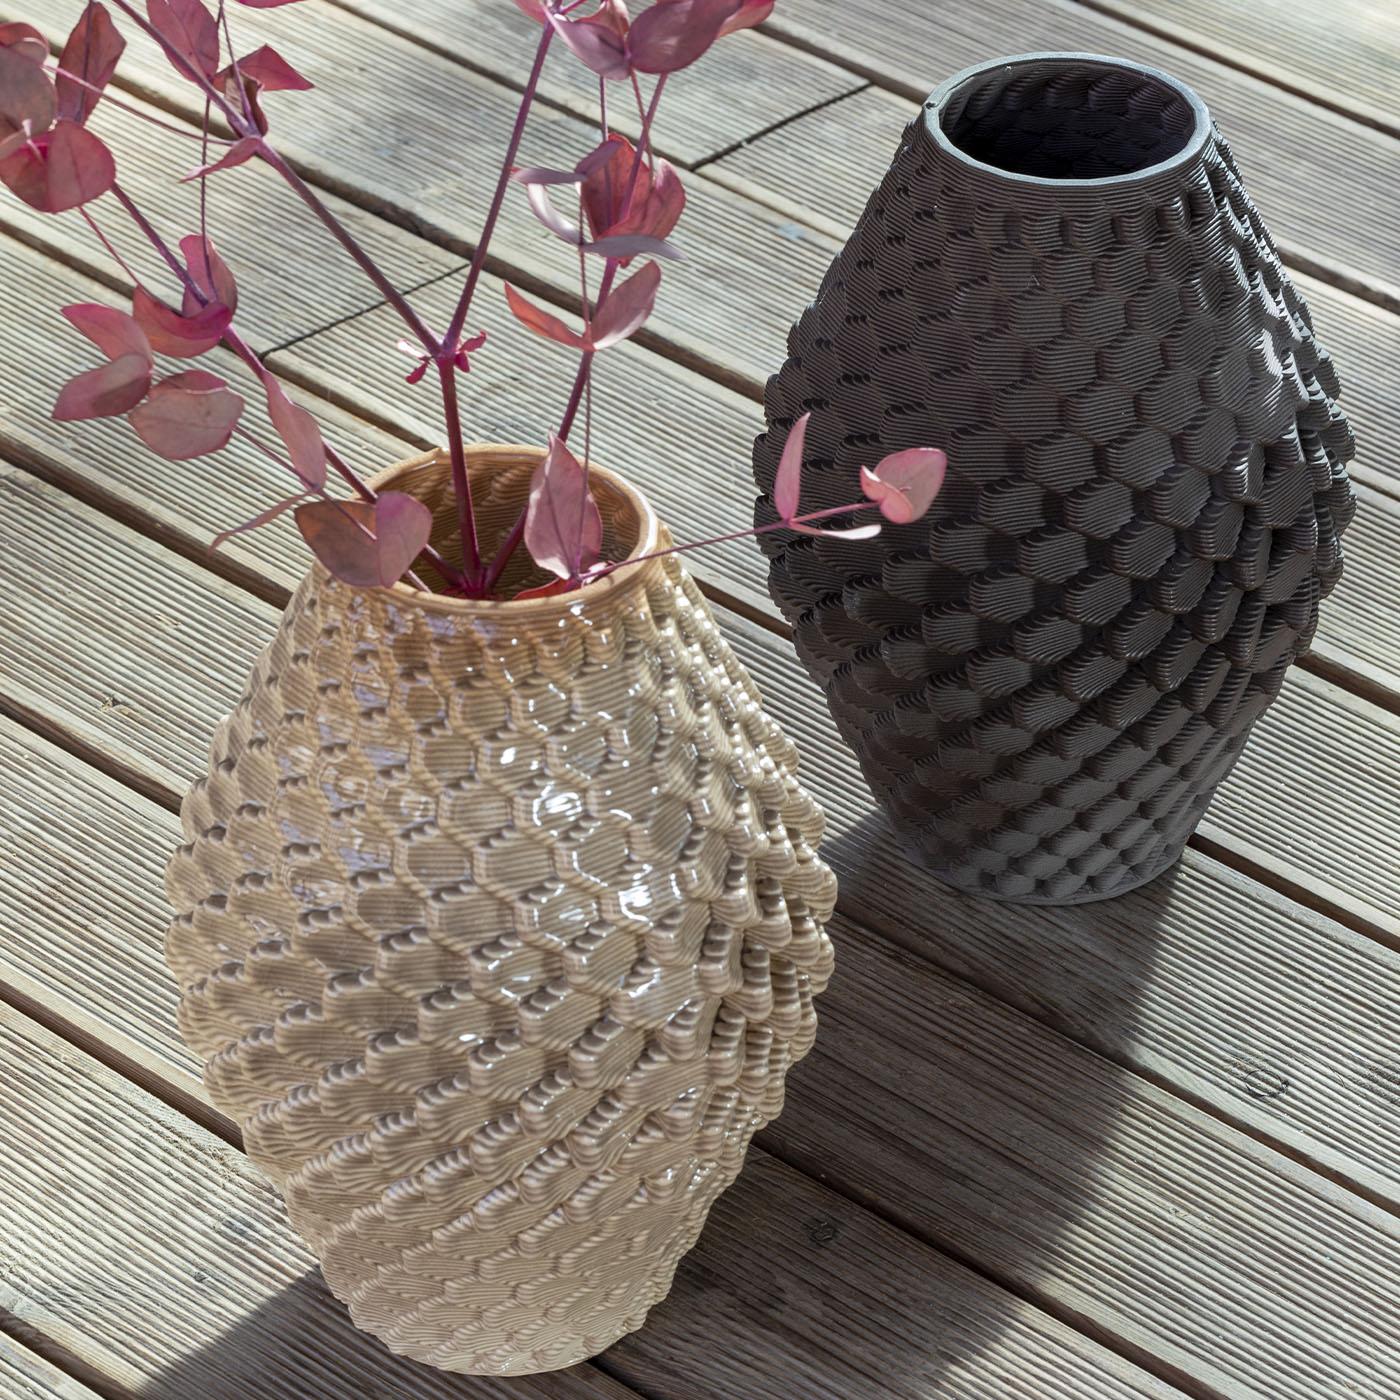 Alma, a 3D-printed vase, draws from the Caltagirone pine cone's shape, symbolizing vitality and eternity. Combining digital artistry, craftsmanship, and nature, it embodies Sicilian allure. Reflecting the fertility of the mind and novel ideas, Alma